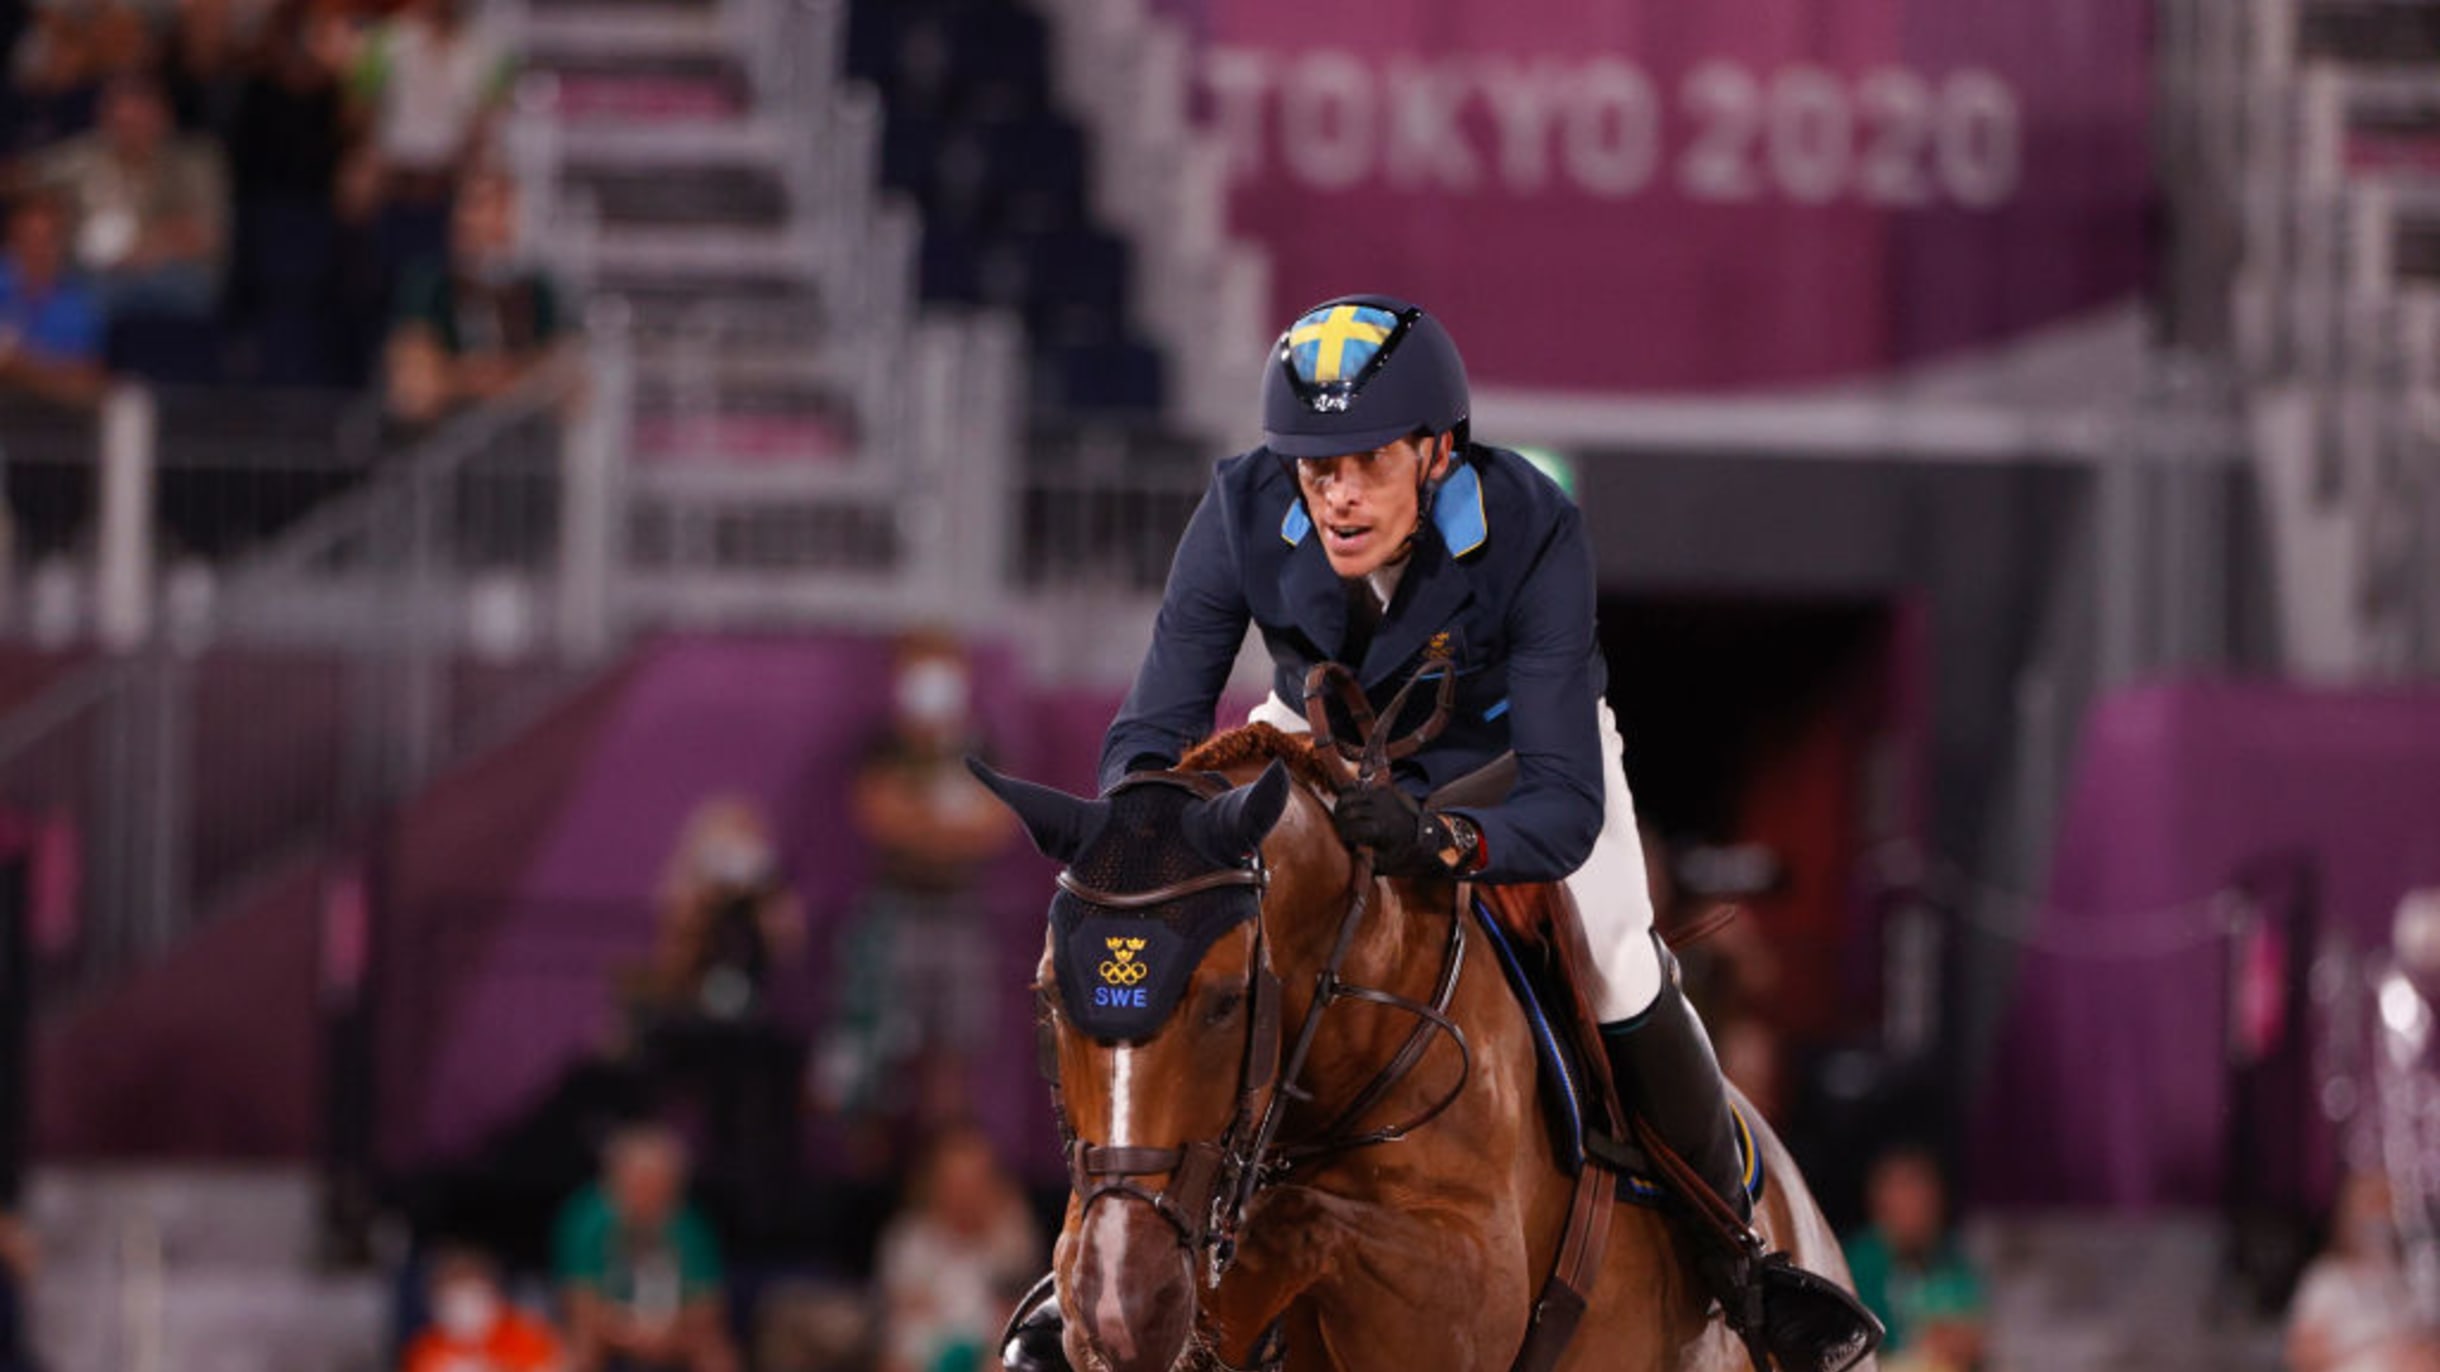 FEI Jumping World Championships 2022 Preview, schedule and stars to watch in Paris 2024 qualifier